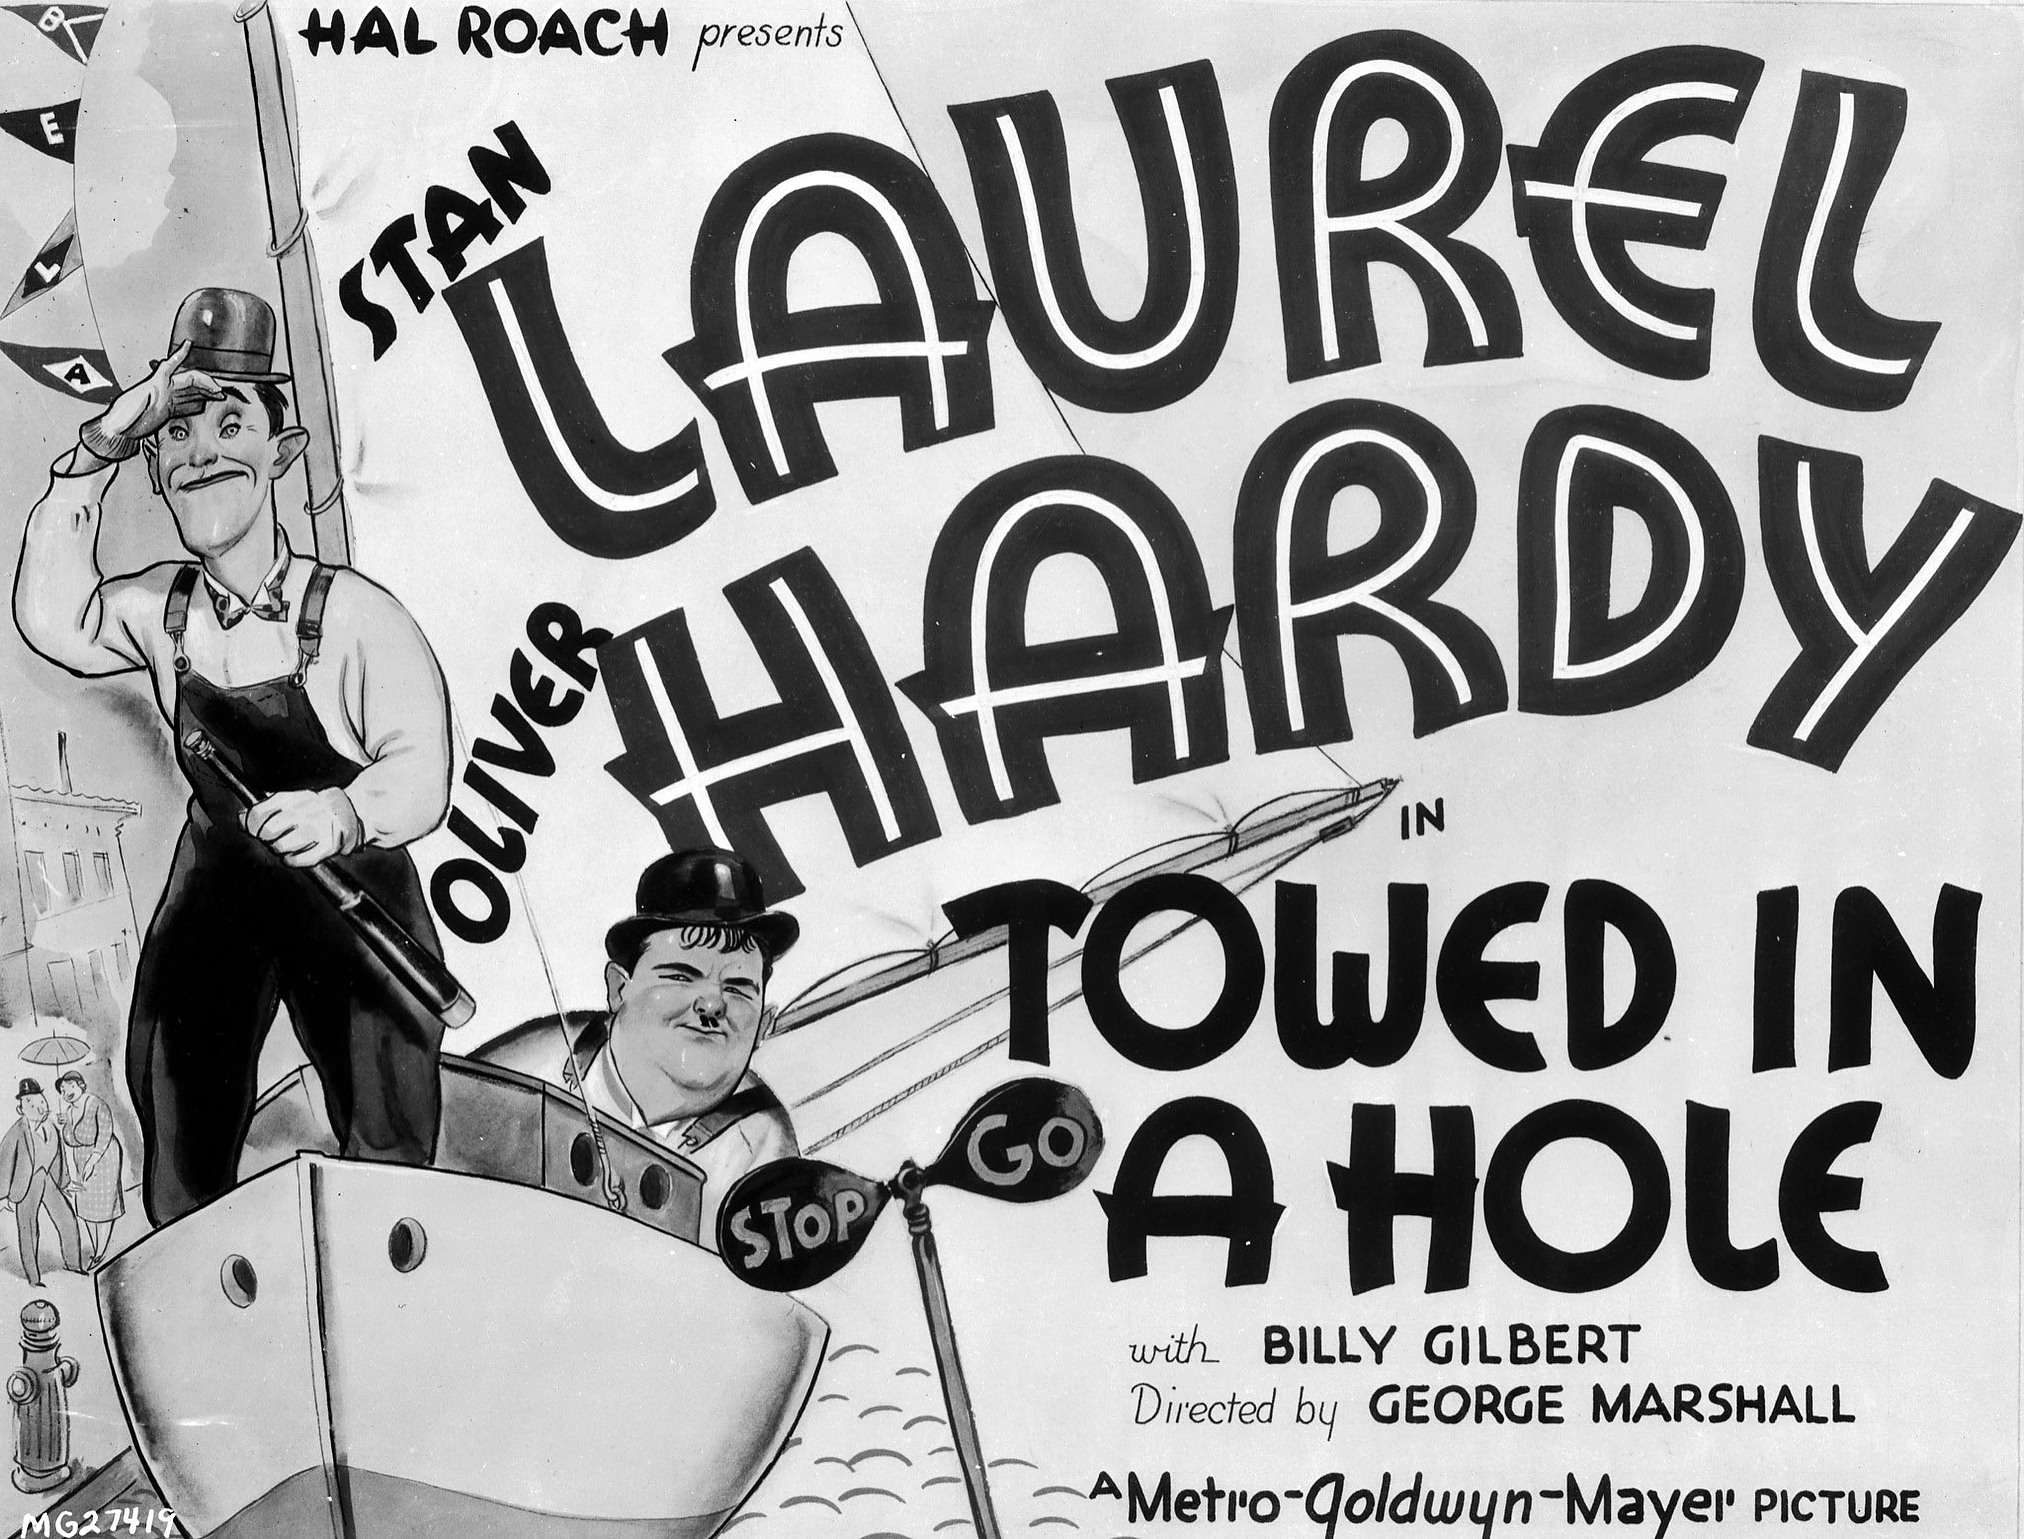 A poster advertising the Laurel and Hardy short, 'Towed In A Hole', directed by George Marshall, 1932.